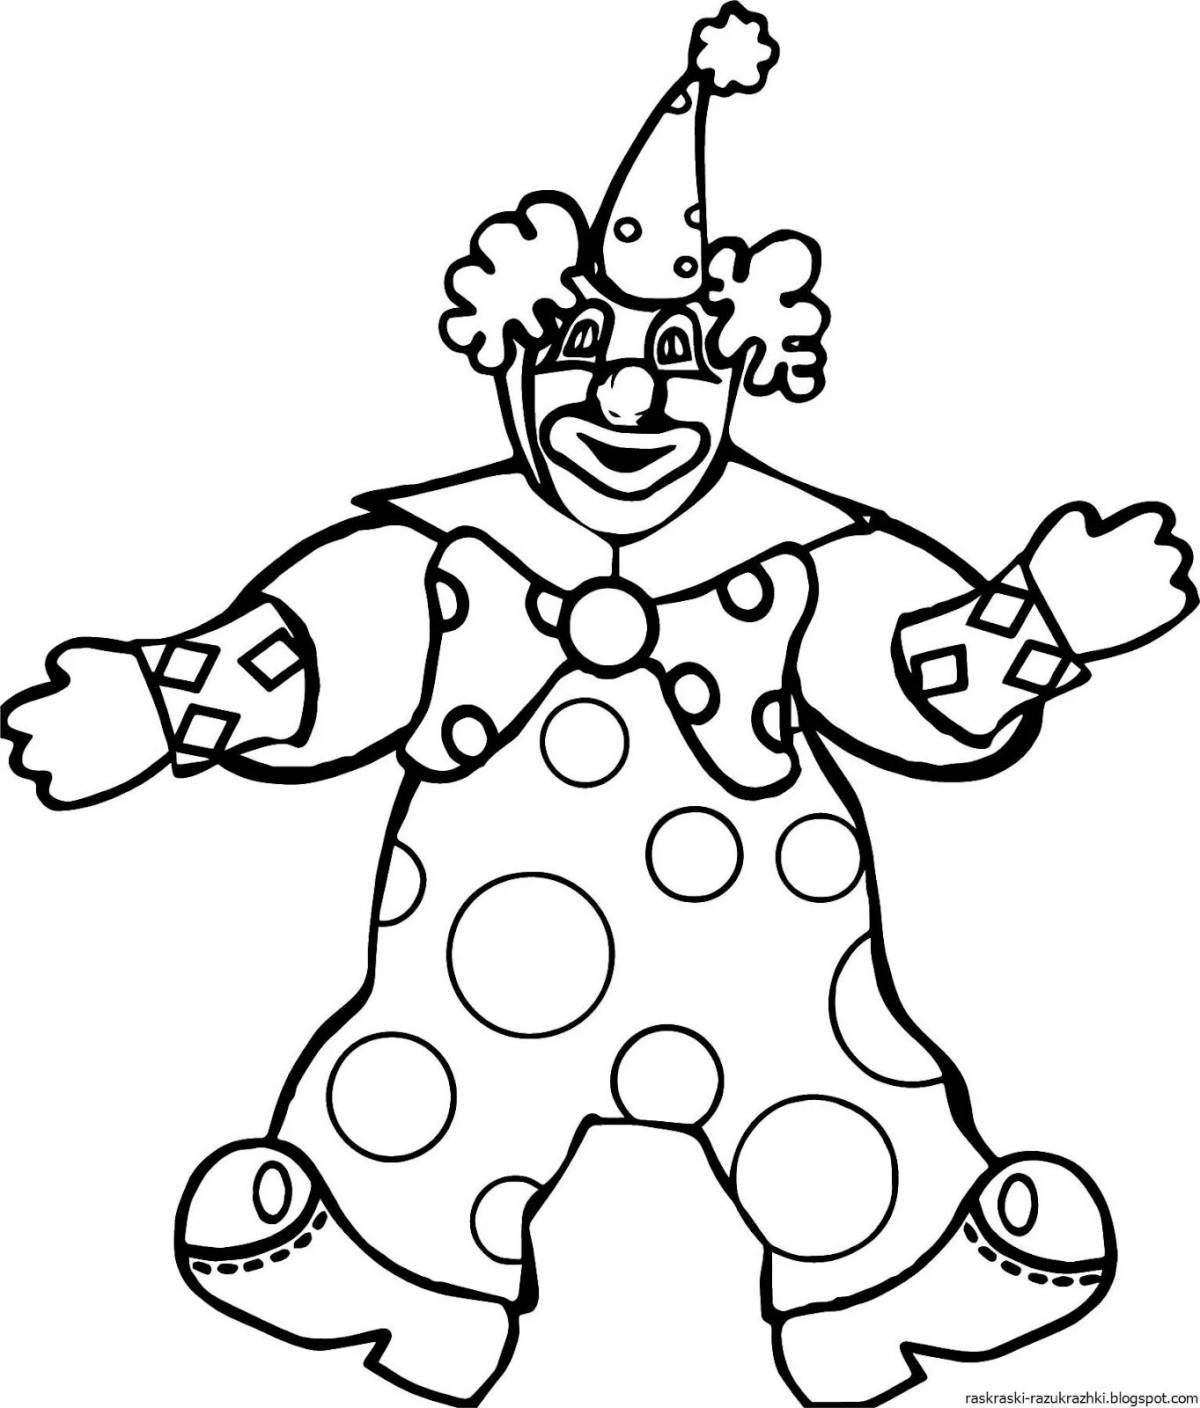 Witty clown coloring pages for kids